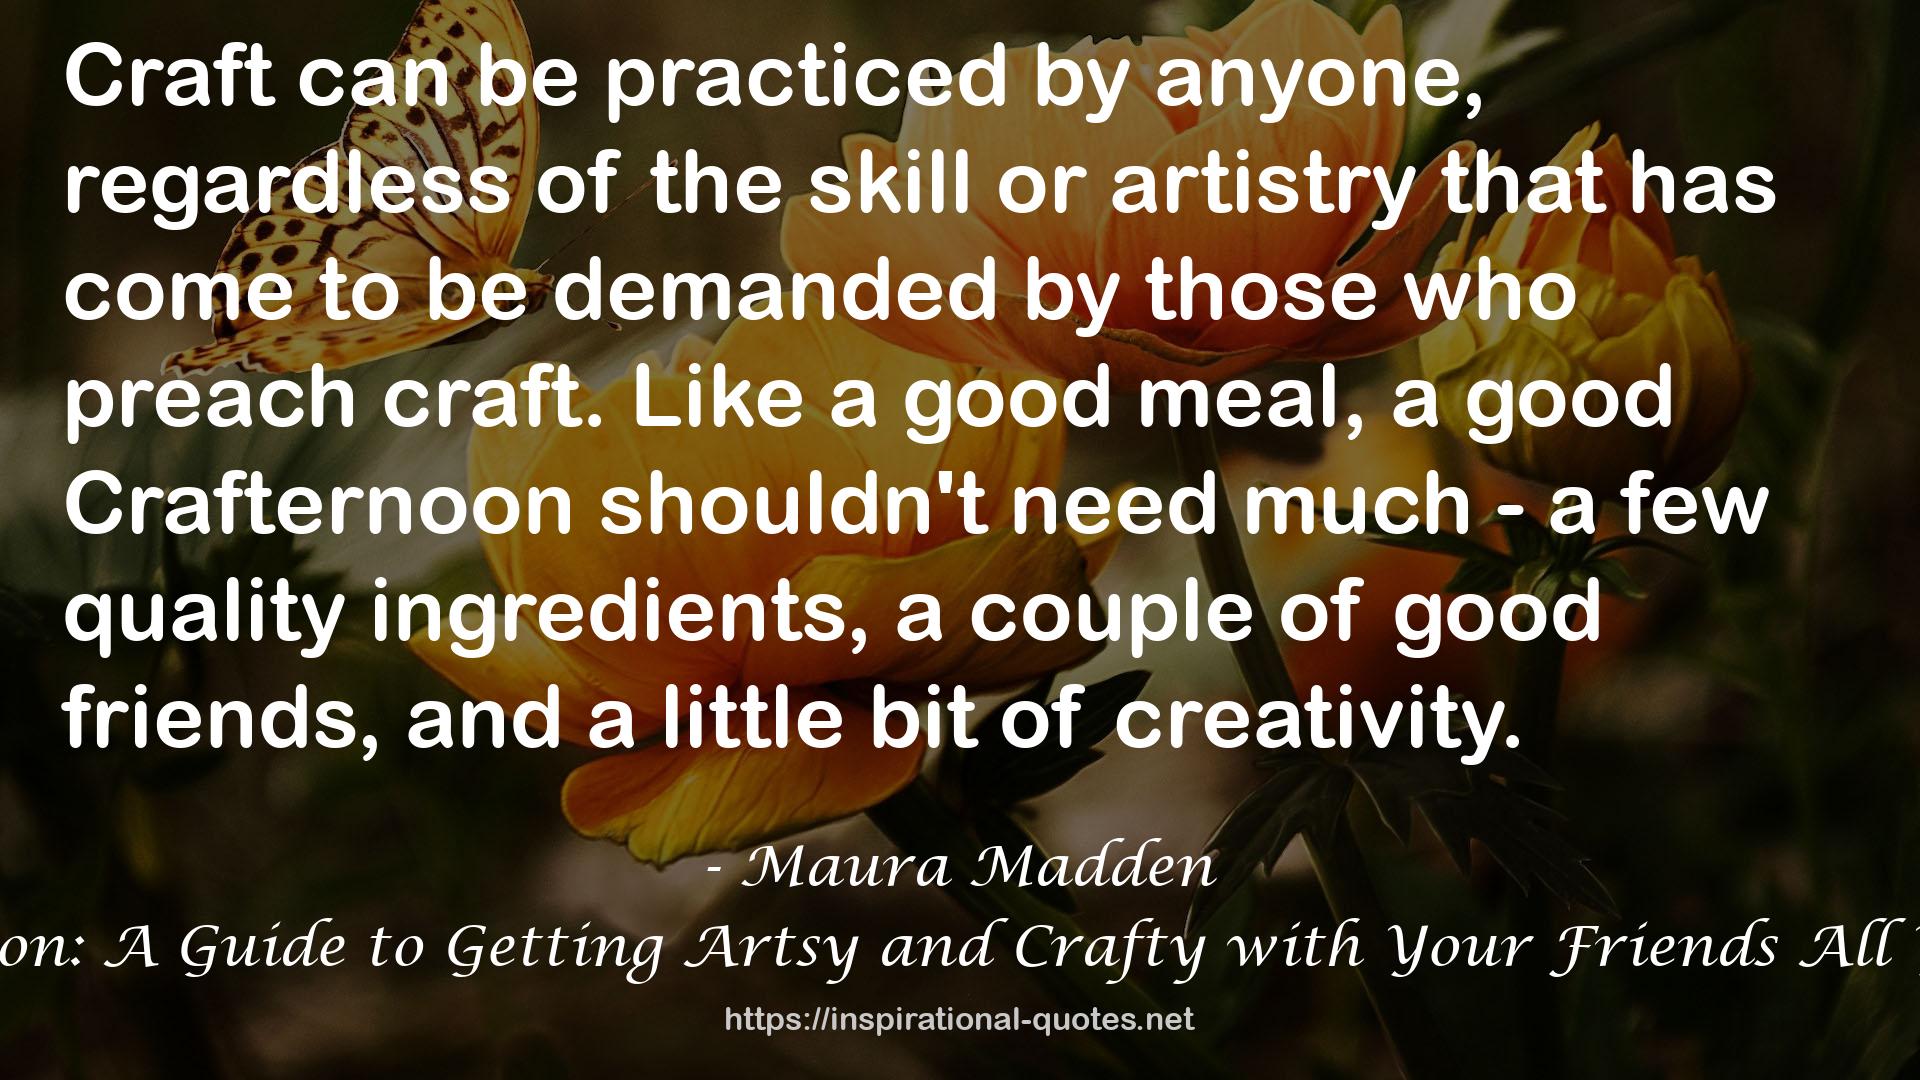 Crafternoon: A Guide to Getting Artsy and Crafty with Your Friends All Year Long QUOTES